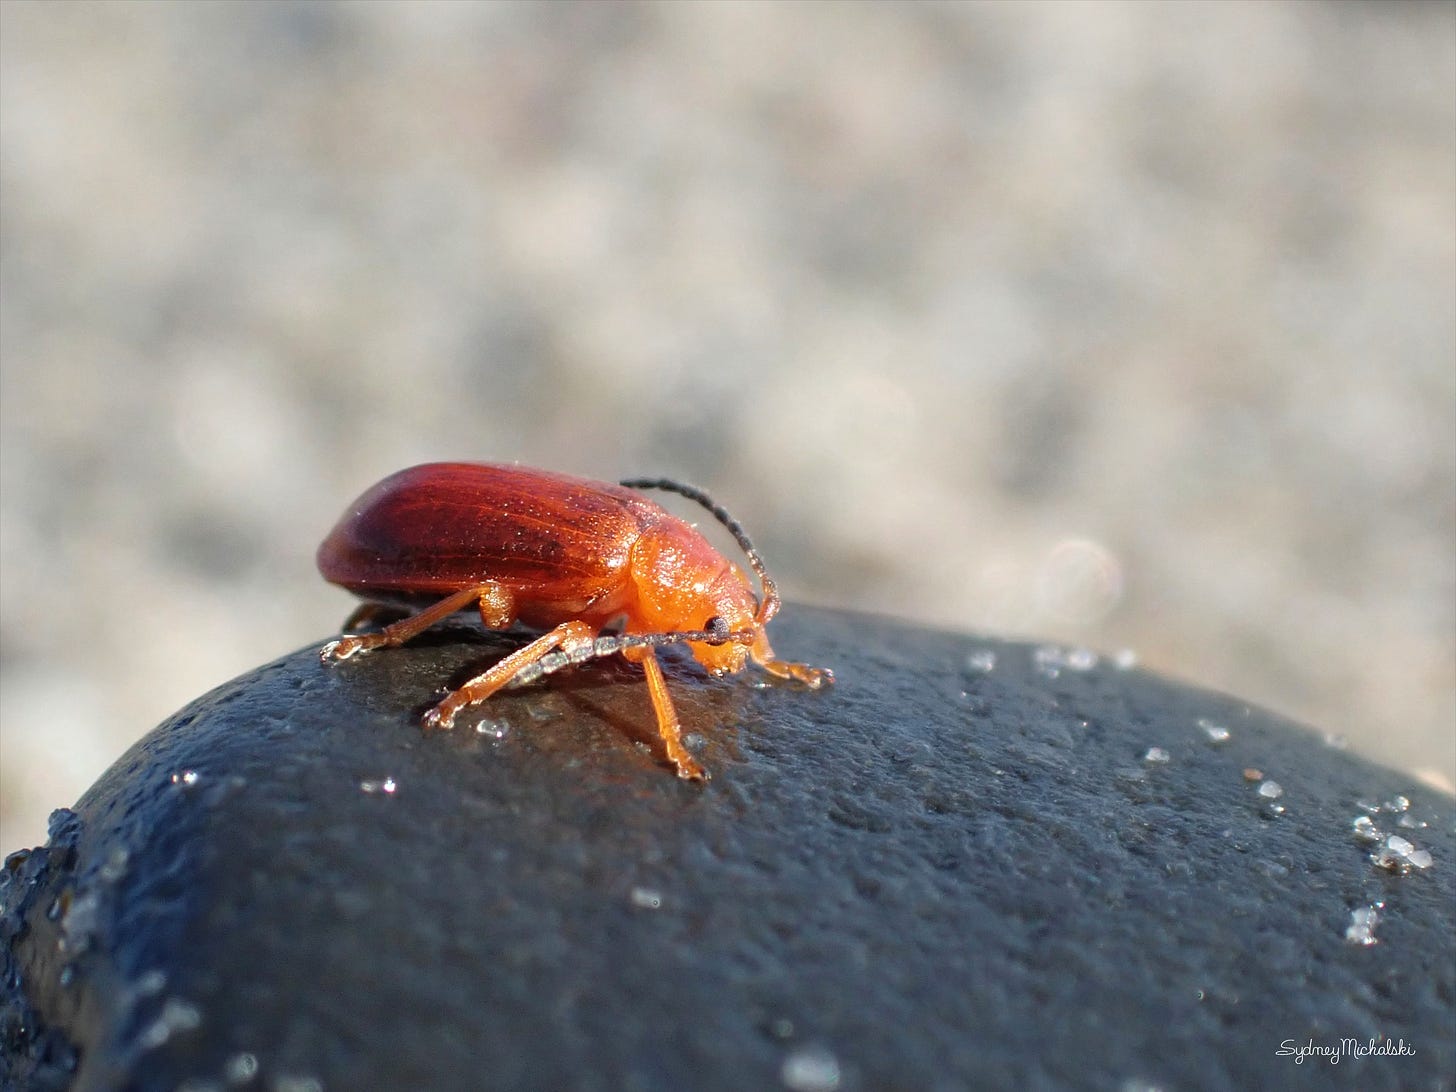 A sparkly orange beetle rests on a smooth stone at the beach.